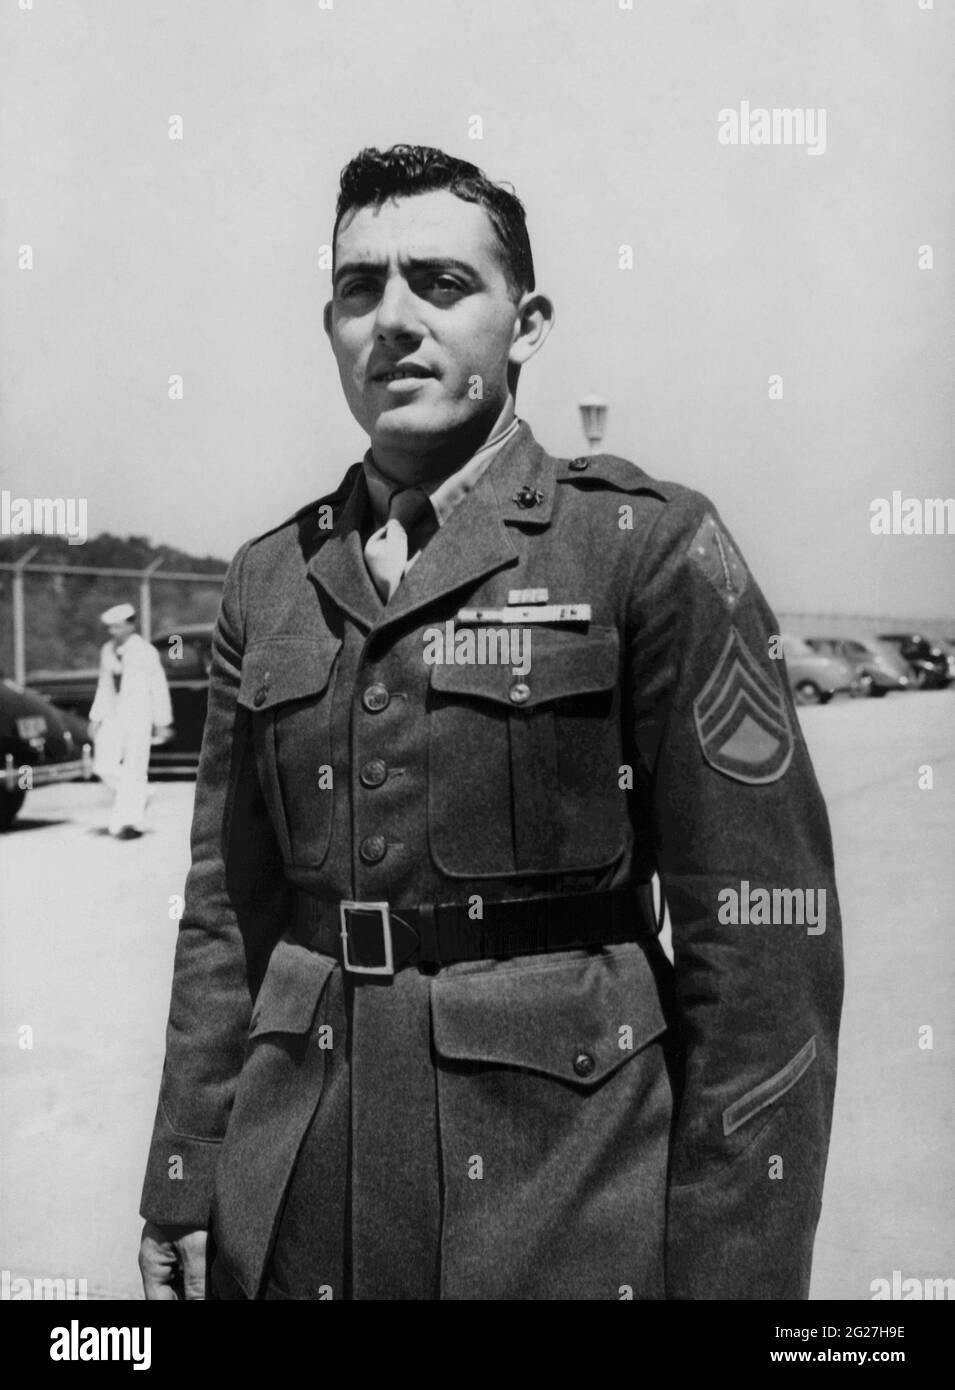 John Basilone, who served as a Gunnery Sergeant in the U.S. Marine Corps during WWII. Stock Photo